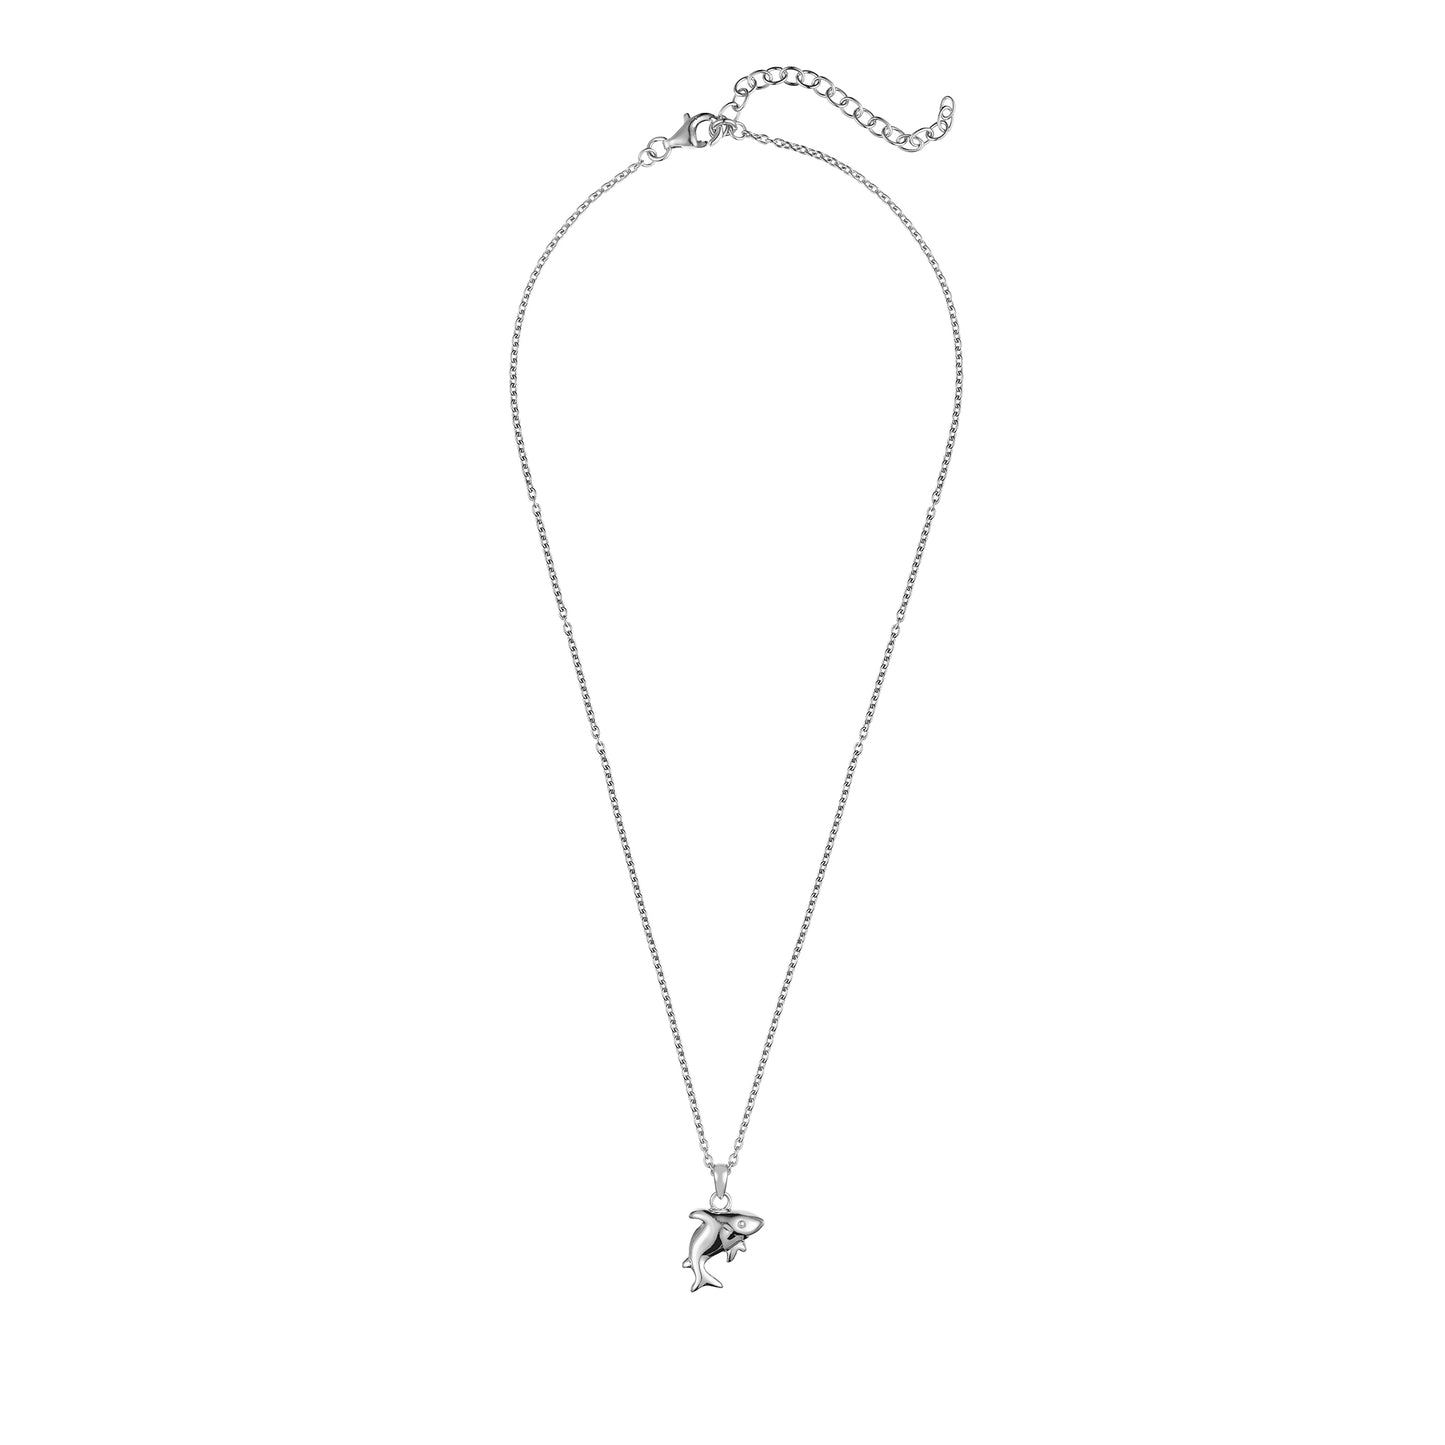 Children's Silver Shark with Smile Pendant on an Extendable Chain Necklace